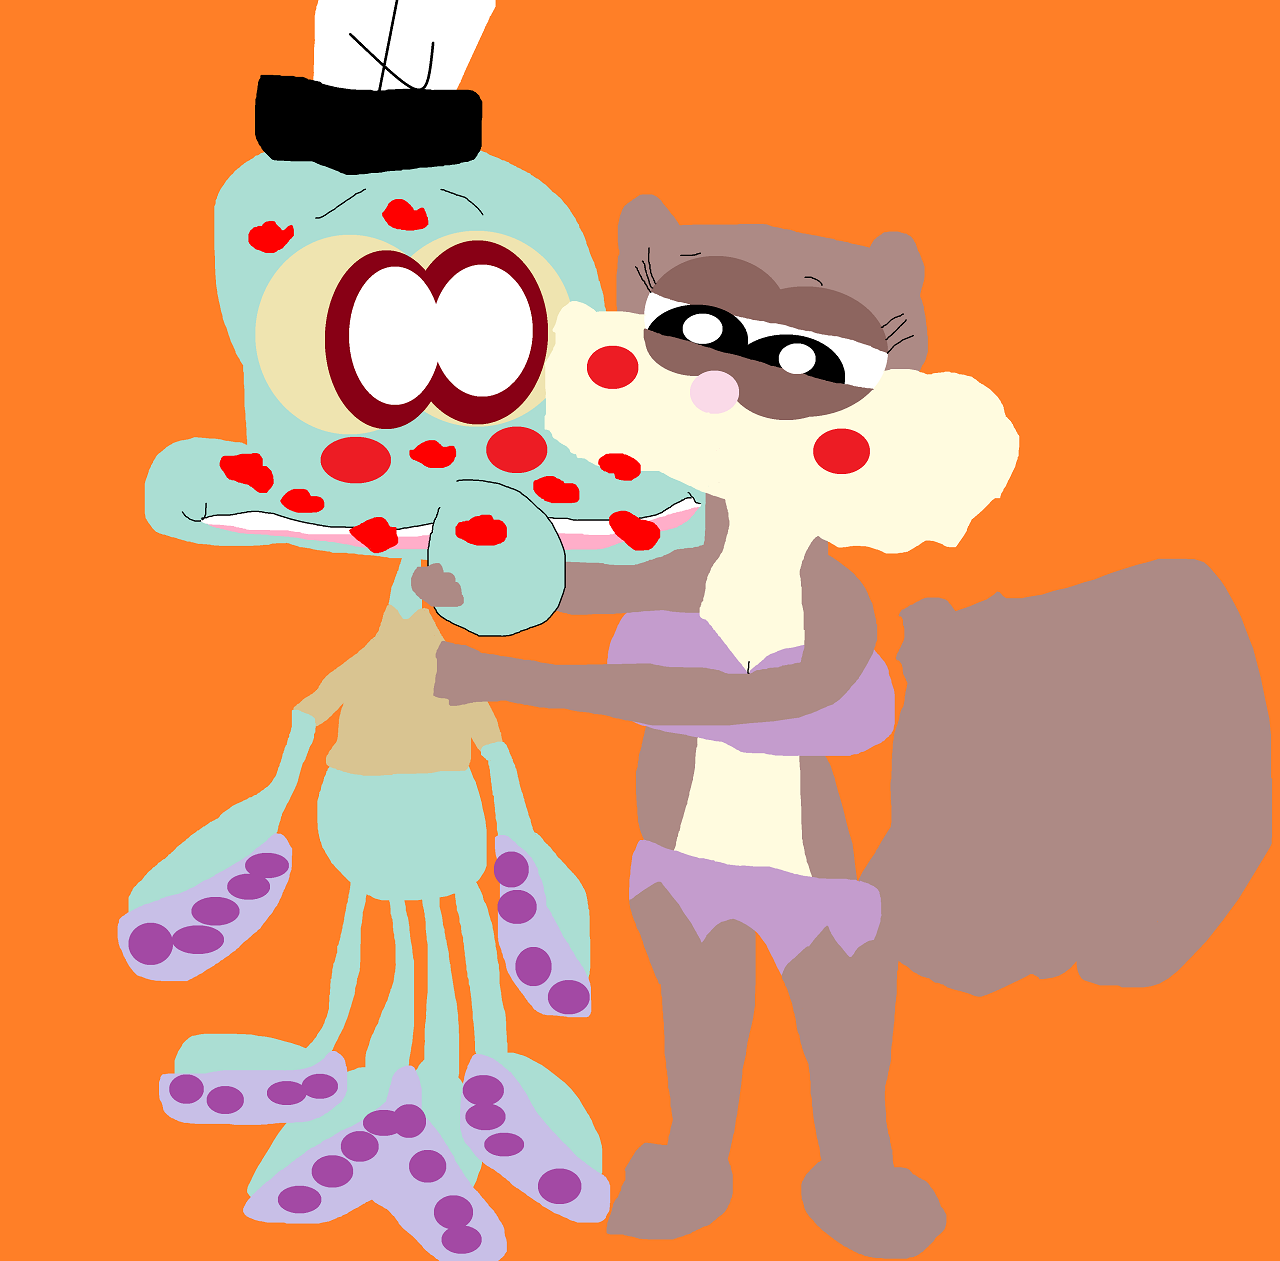 Sandy Covering Squidward With Kisses by Falconlobo